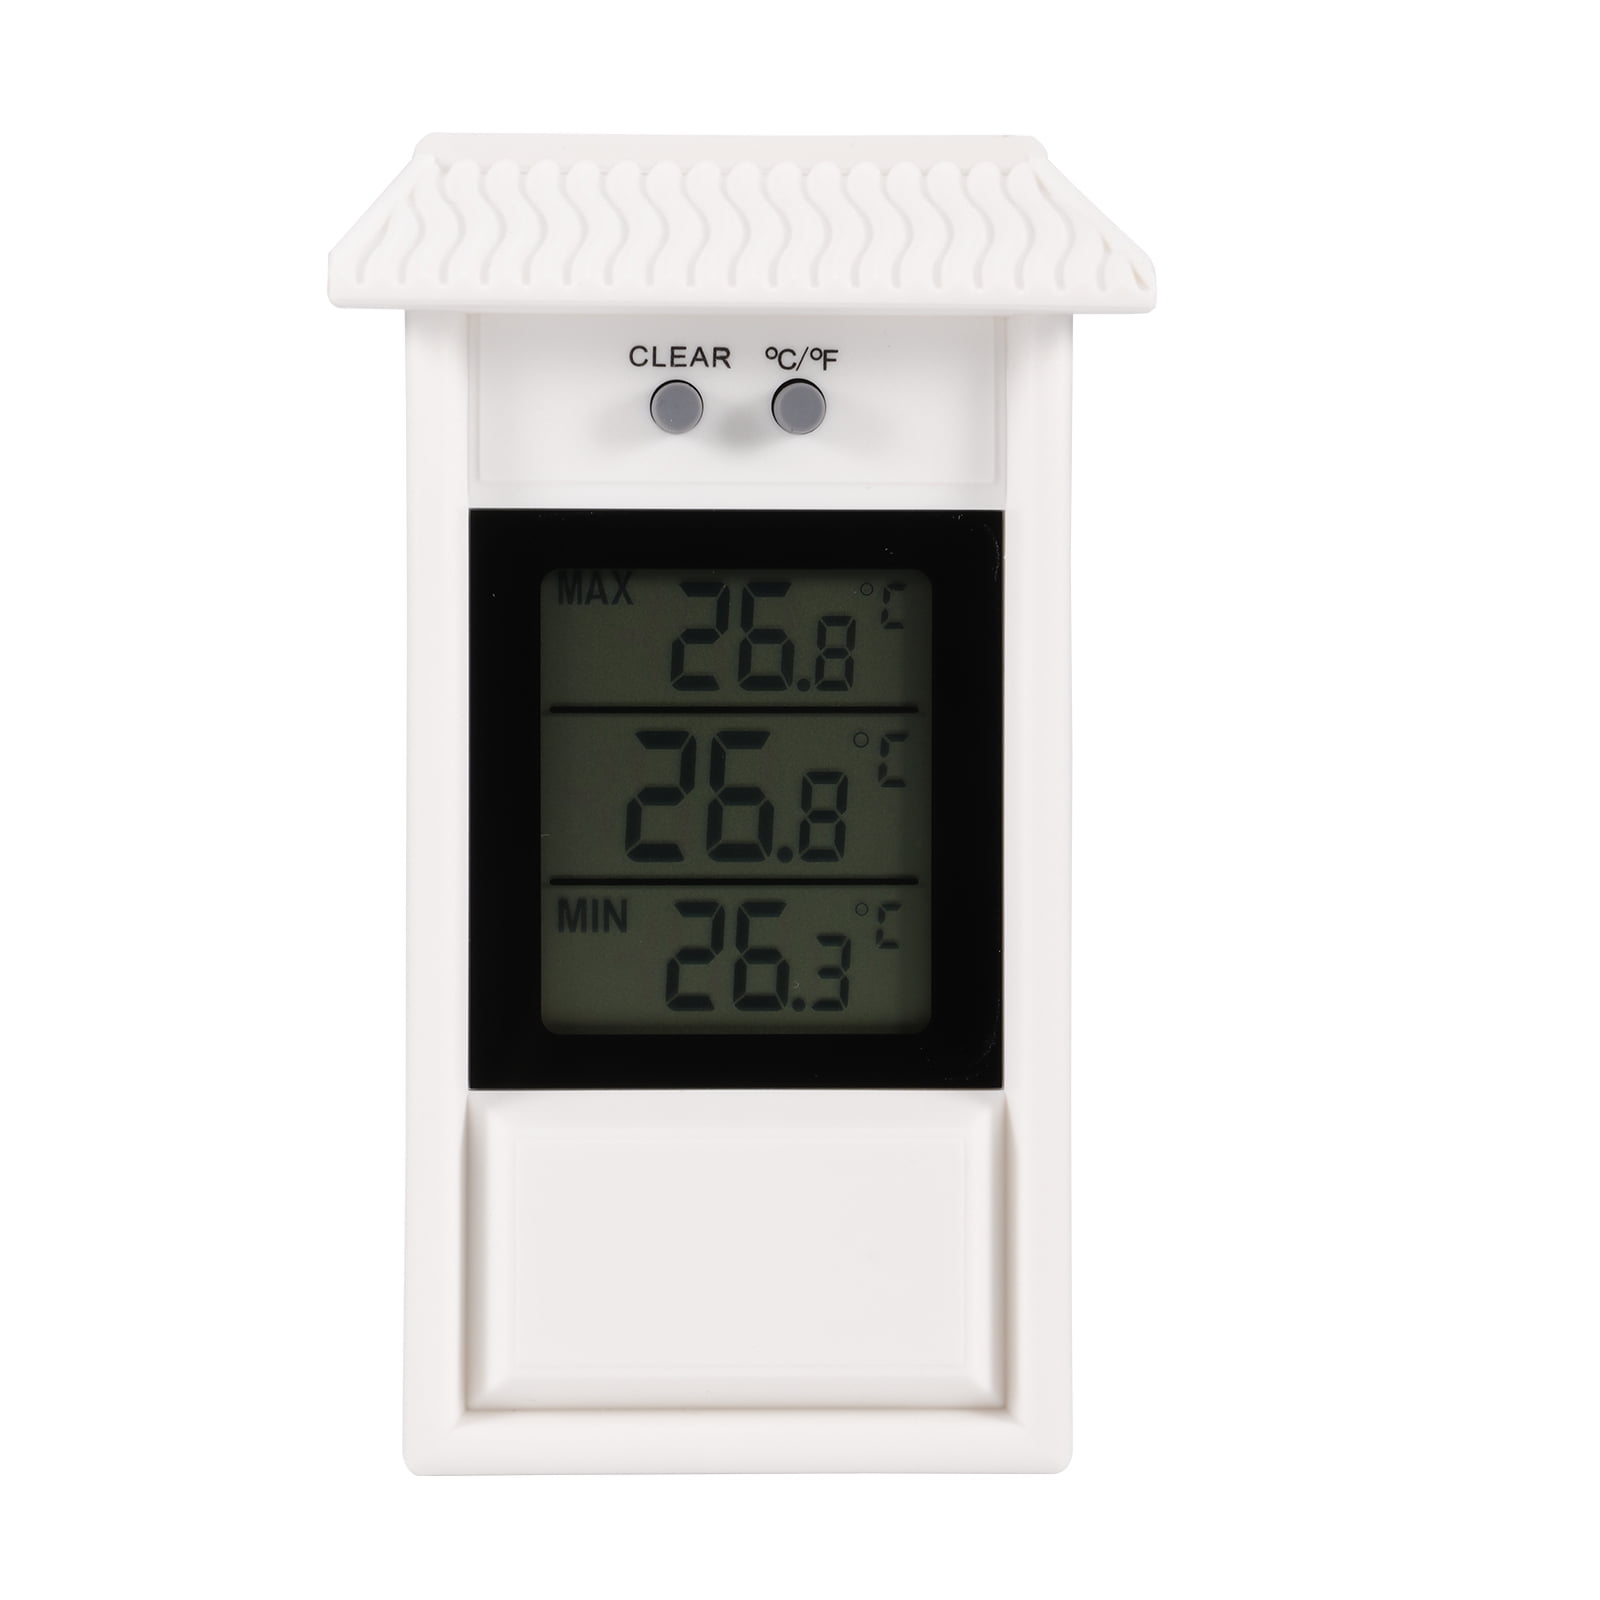 Window Mounted Temperature Thermometer for Garden Greenhouse Home Office Room 